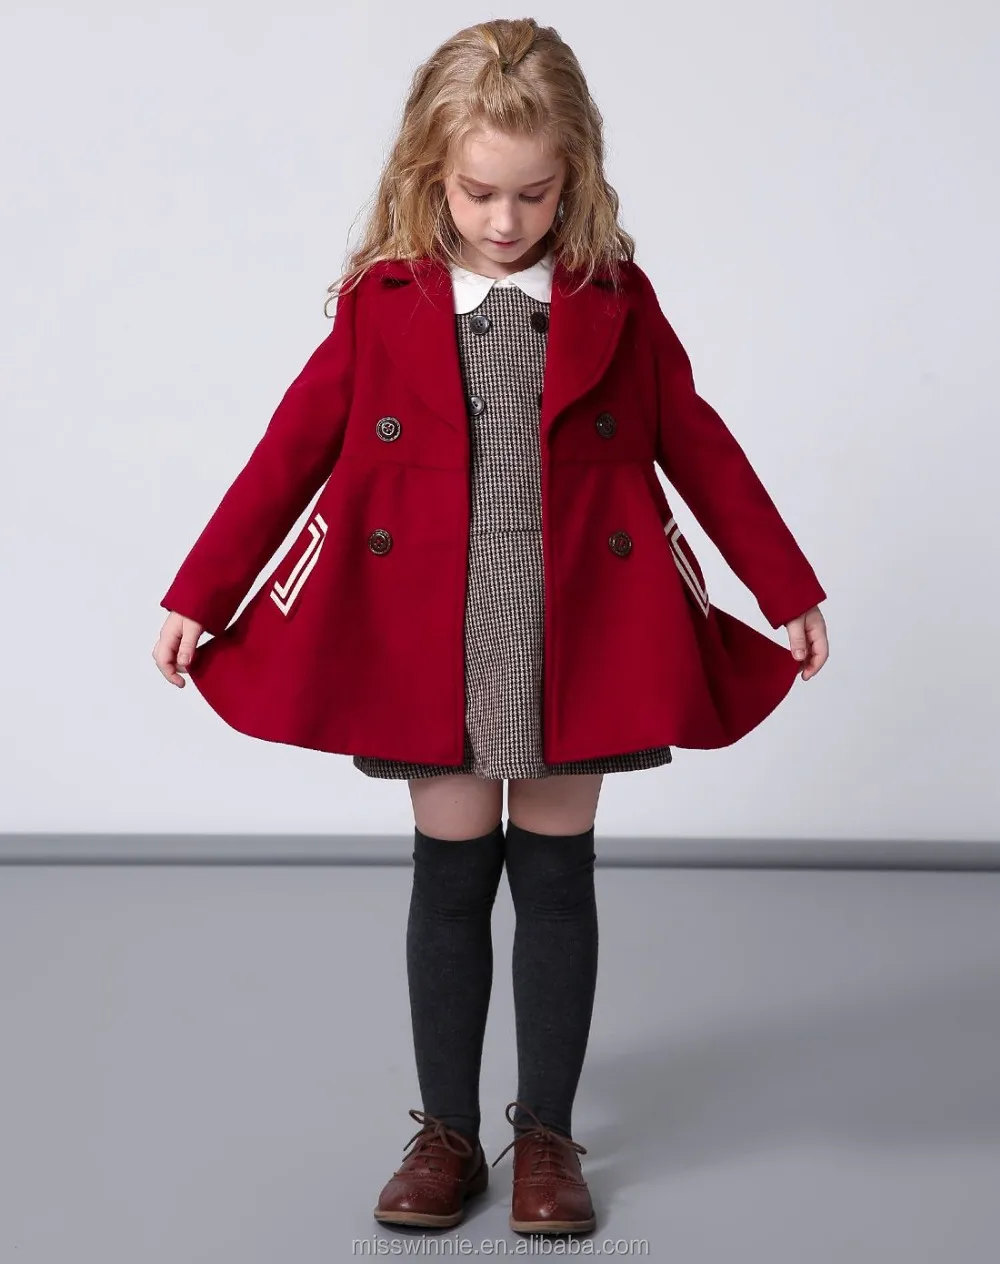 Kids Winter Clothes Wholesale New Fashion Girls Claret-red Wool Coats ...